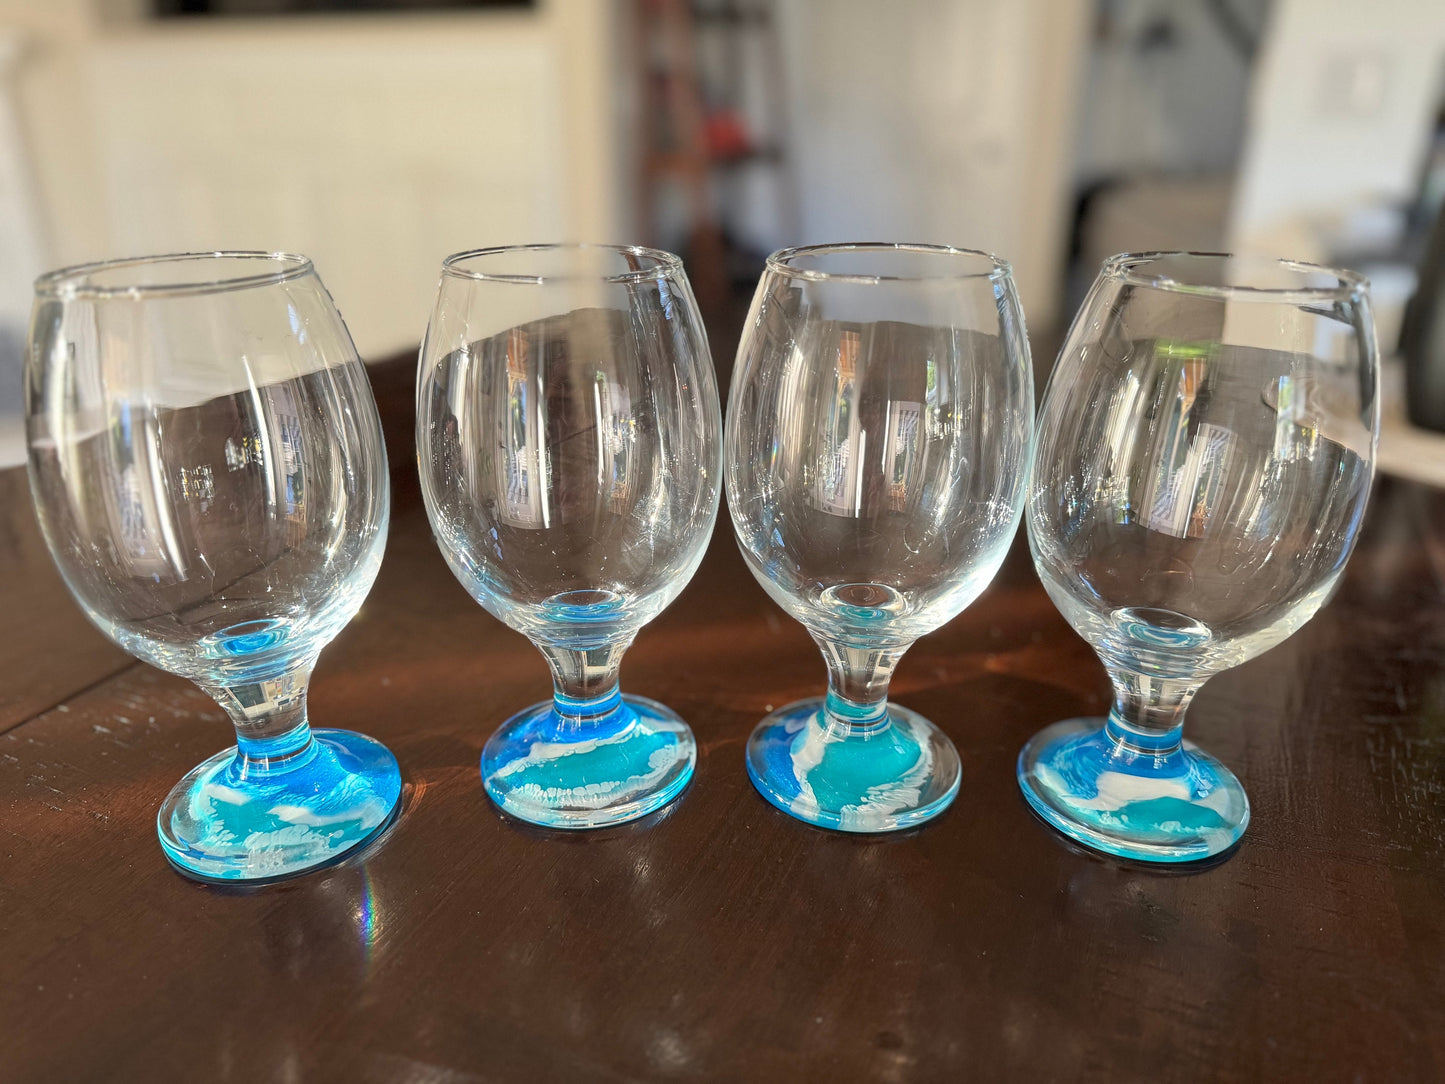 Tulip shaped beer glasses, decoration with resin ocean waves on the base of the glasses. The waves are blue, turquoise, and white foam.